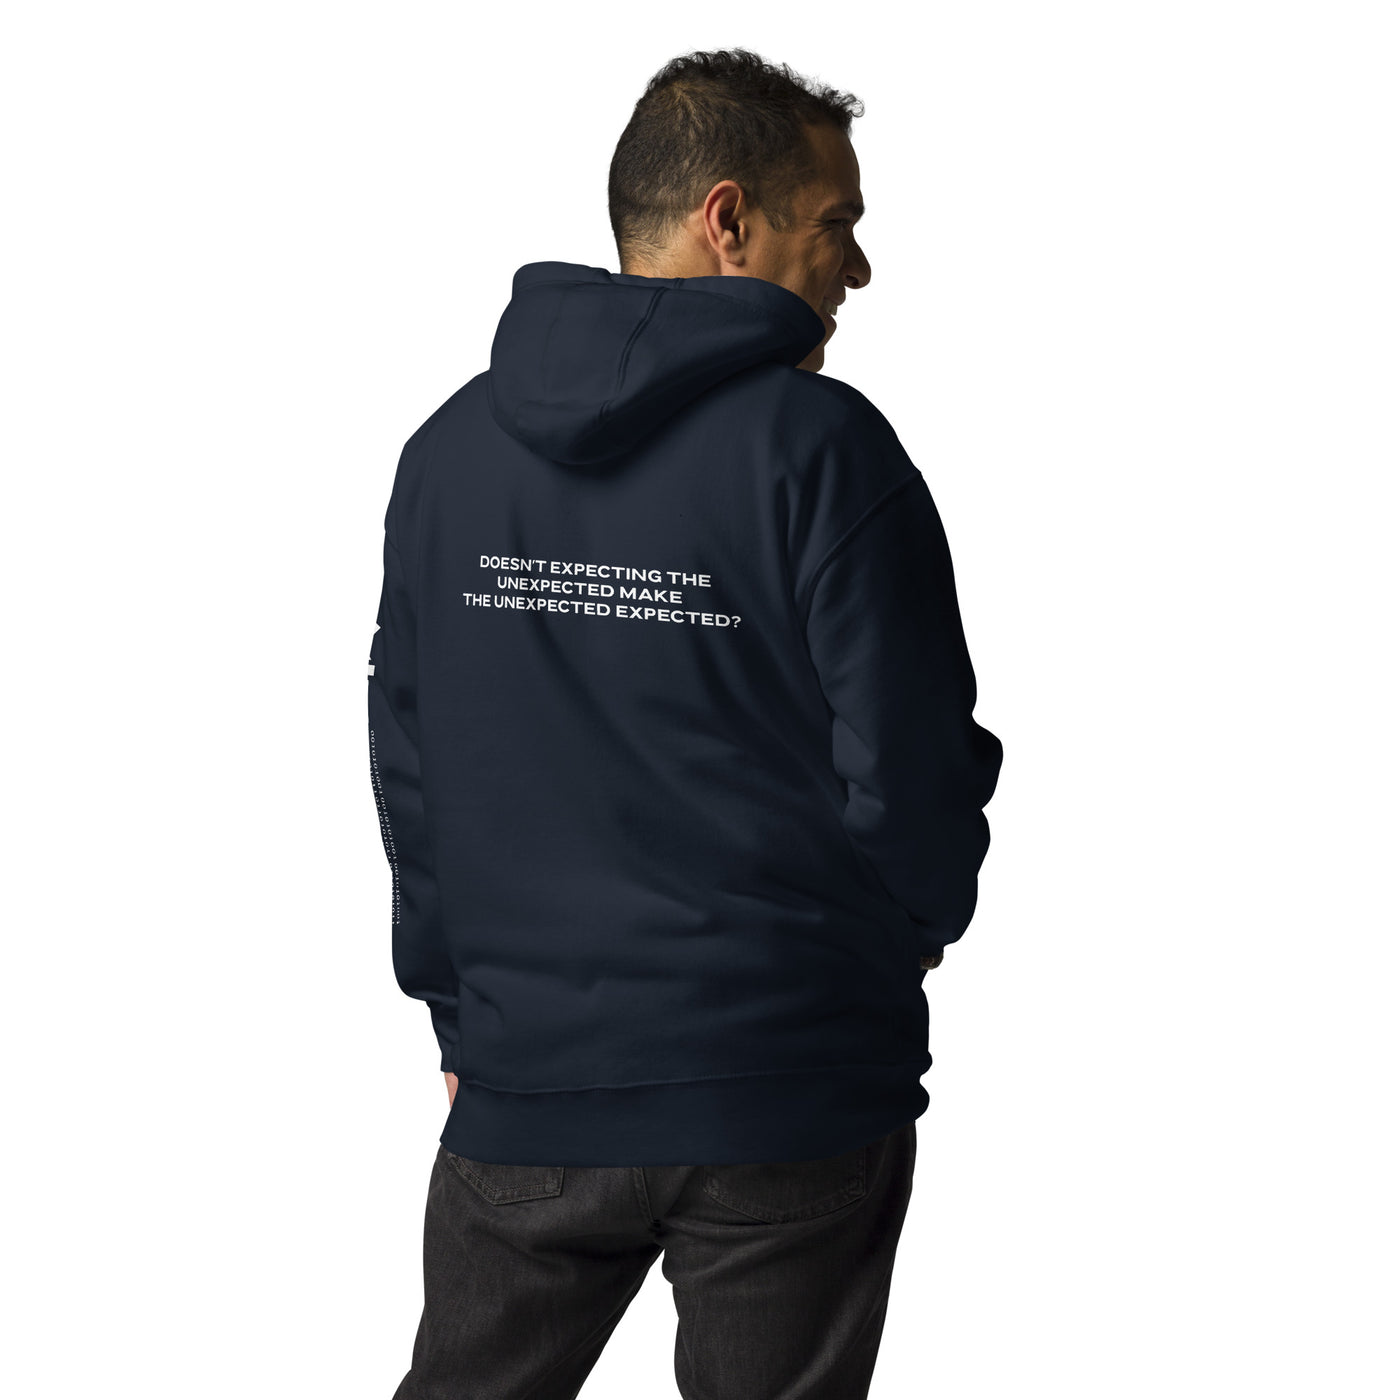 Doesn't expecting the unexpected make the unexpected expected V1 - Unisex Hoodie